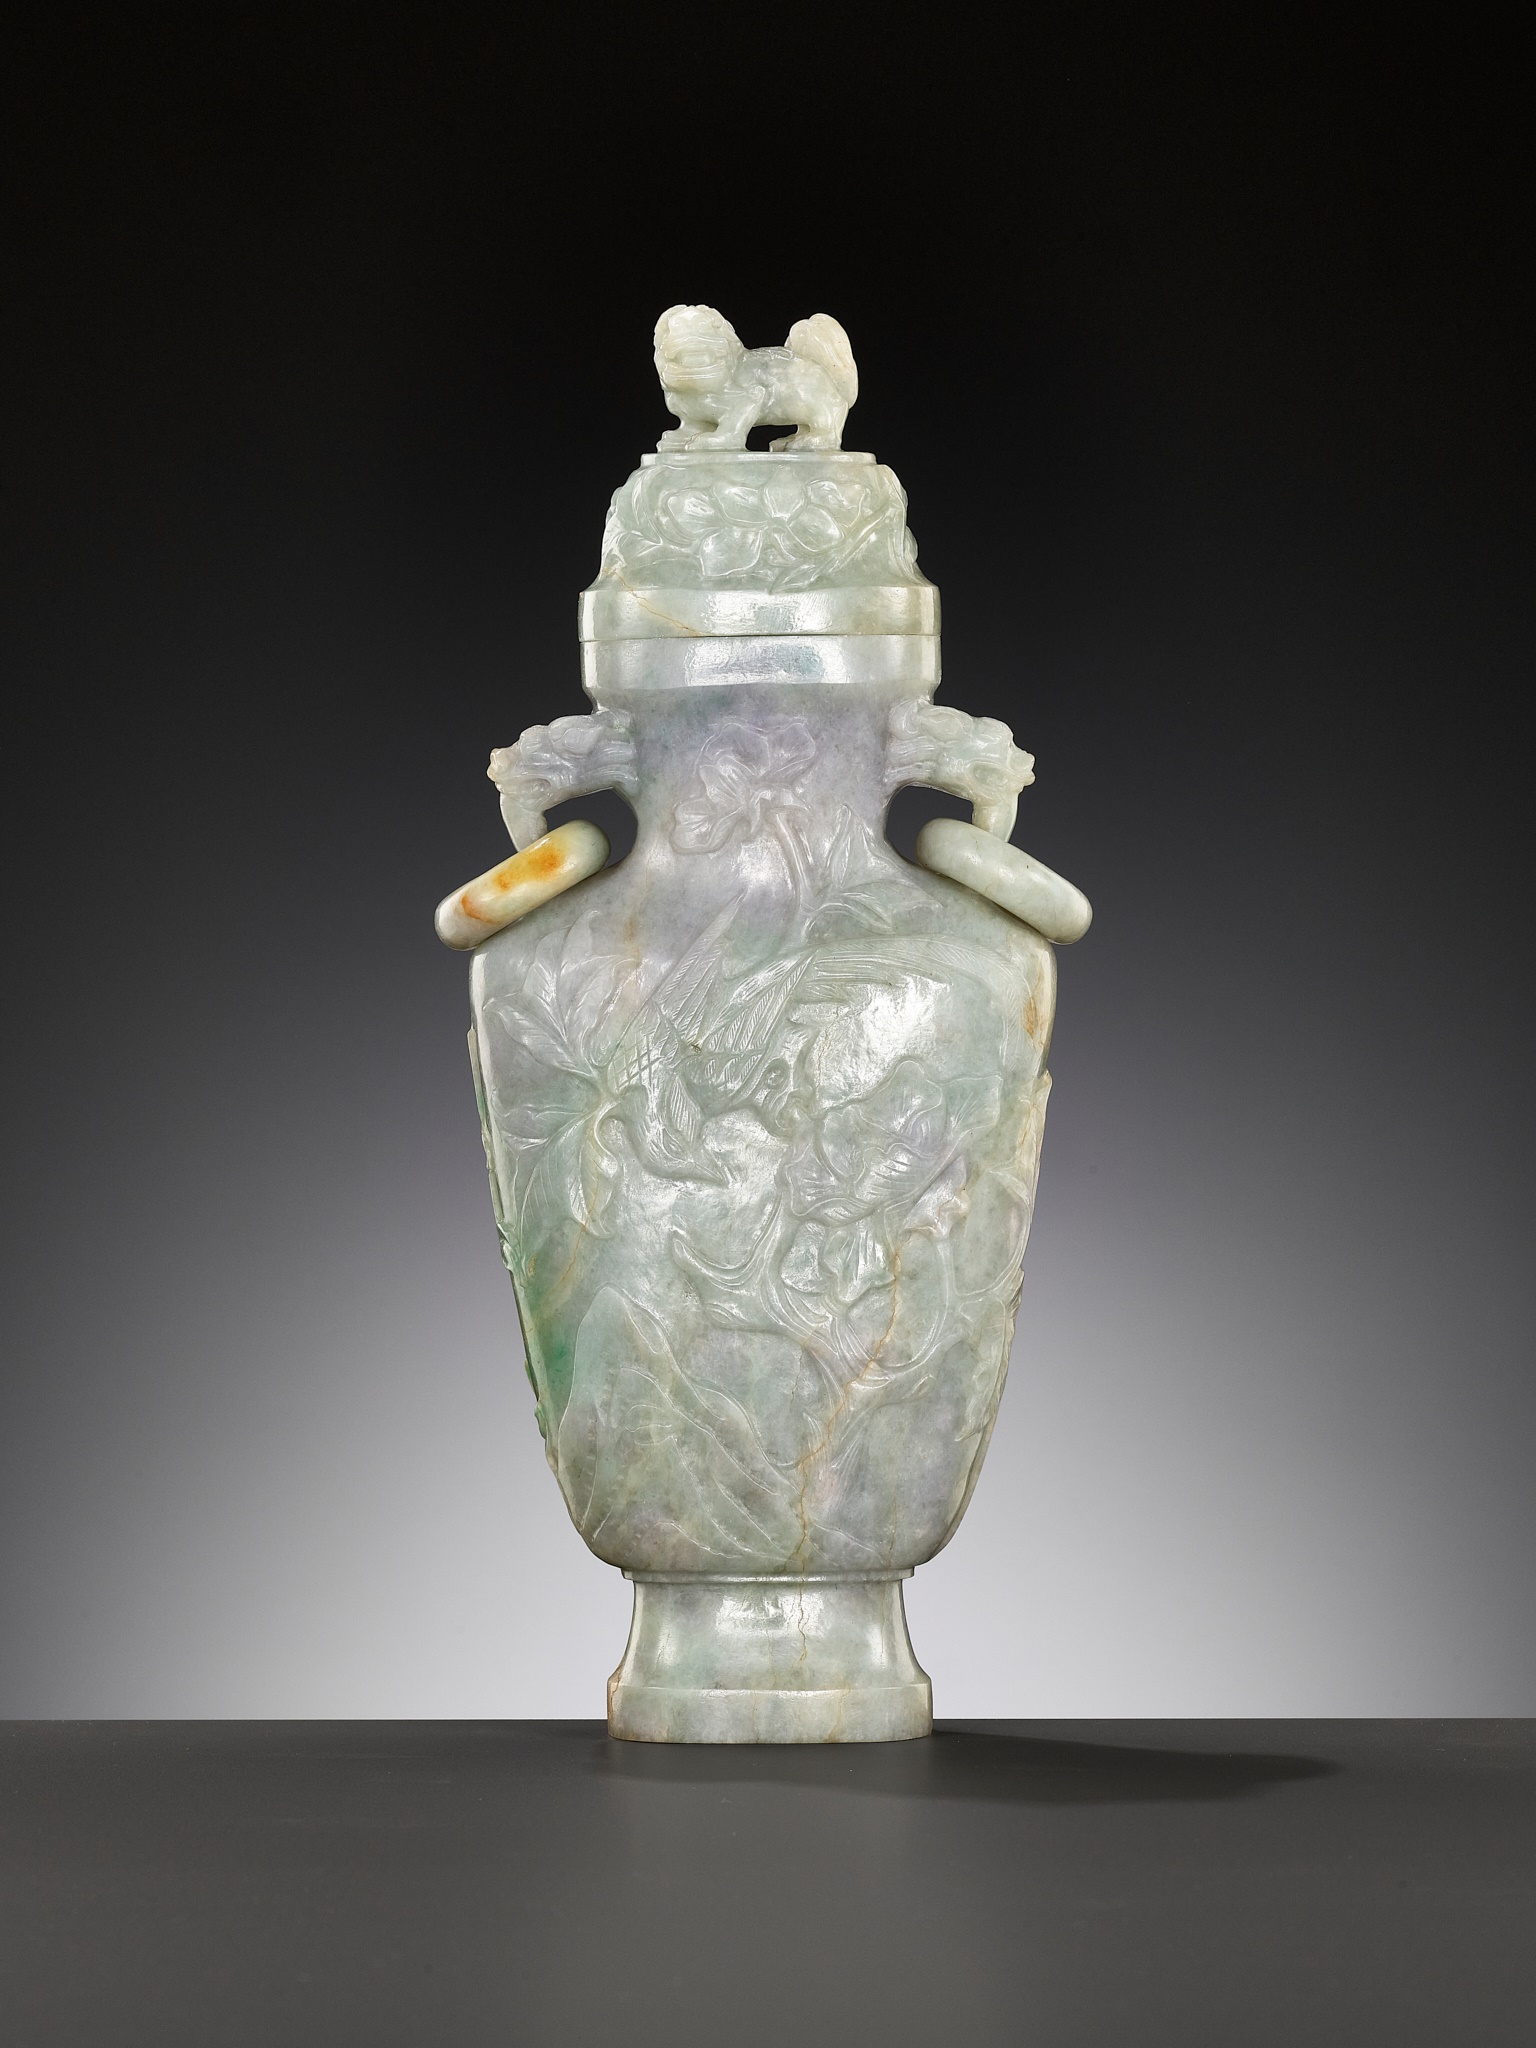 A JADEITE BALUSTER VASE AND COVER, LATE QING DYNASTY TO REPUBLIC PERIOD - Image 2 of 12